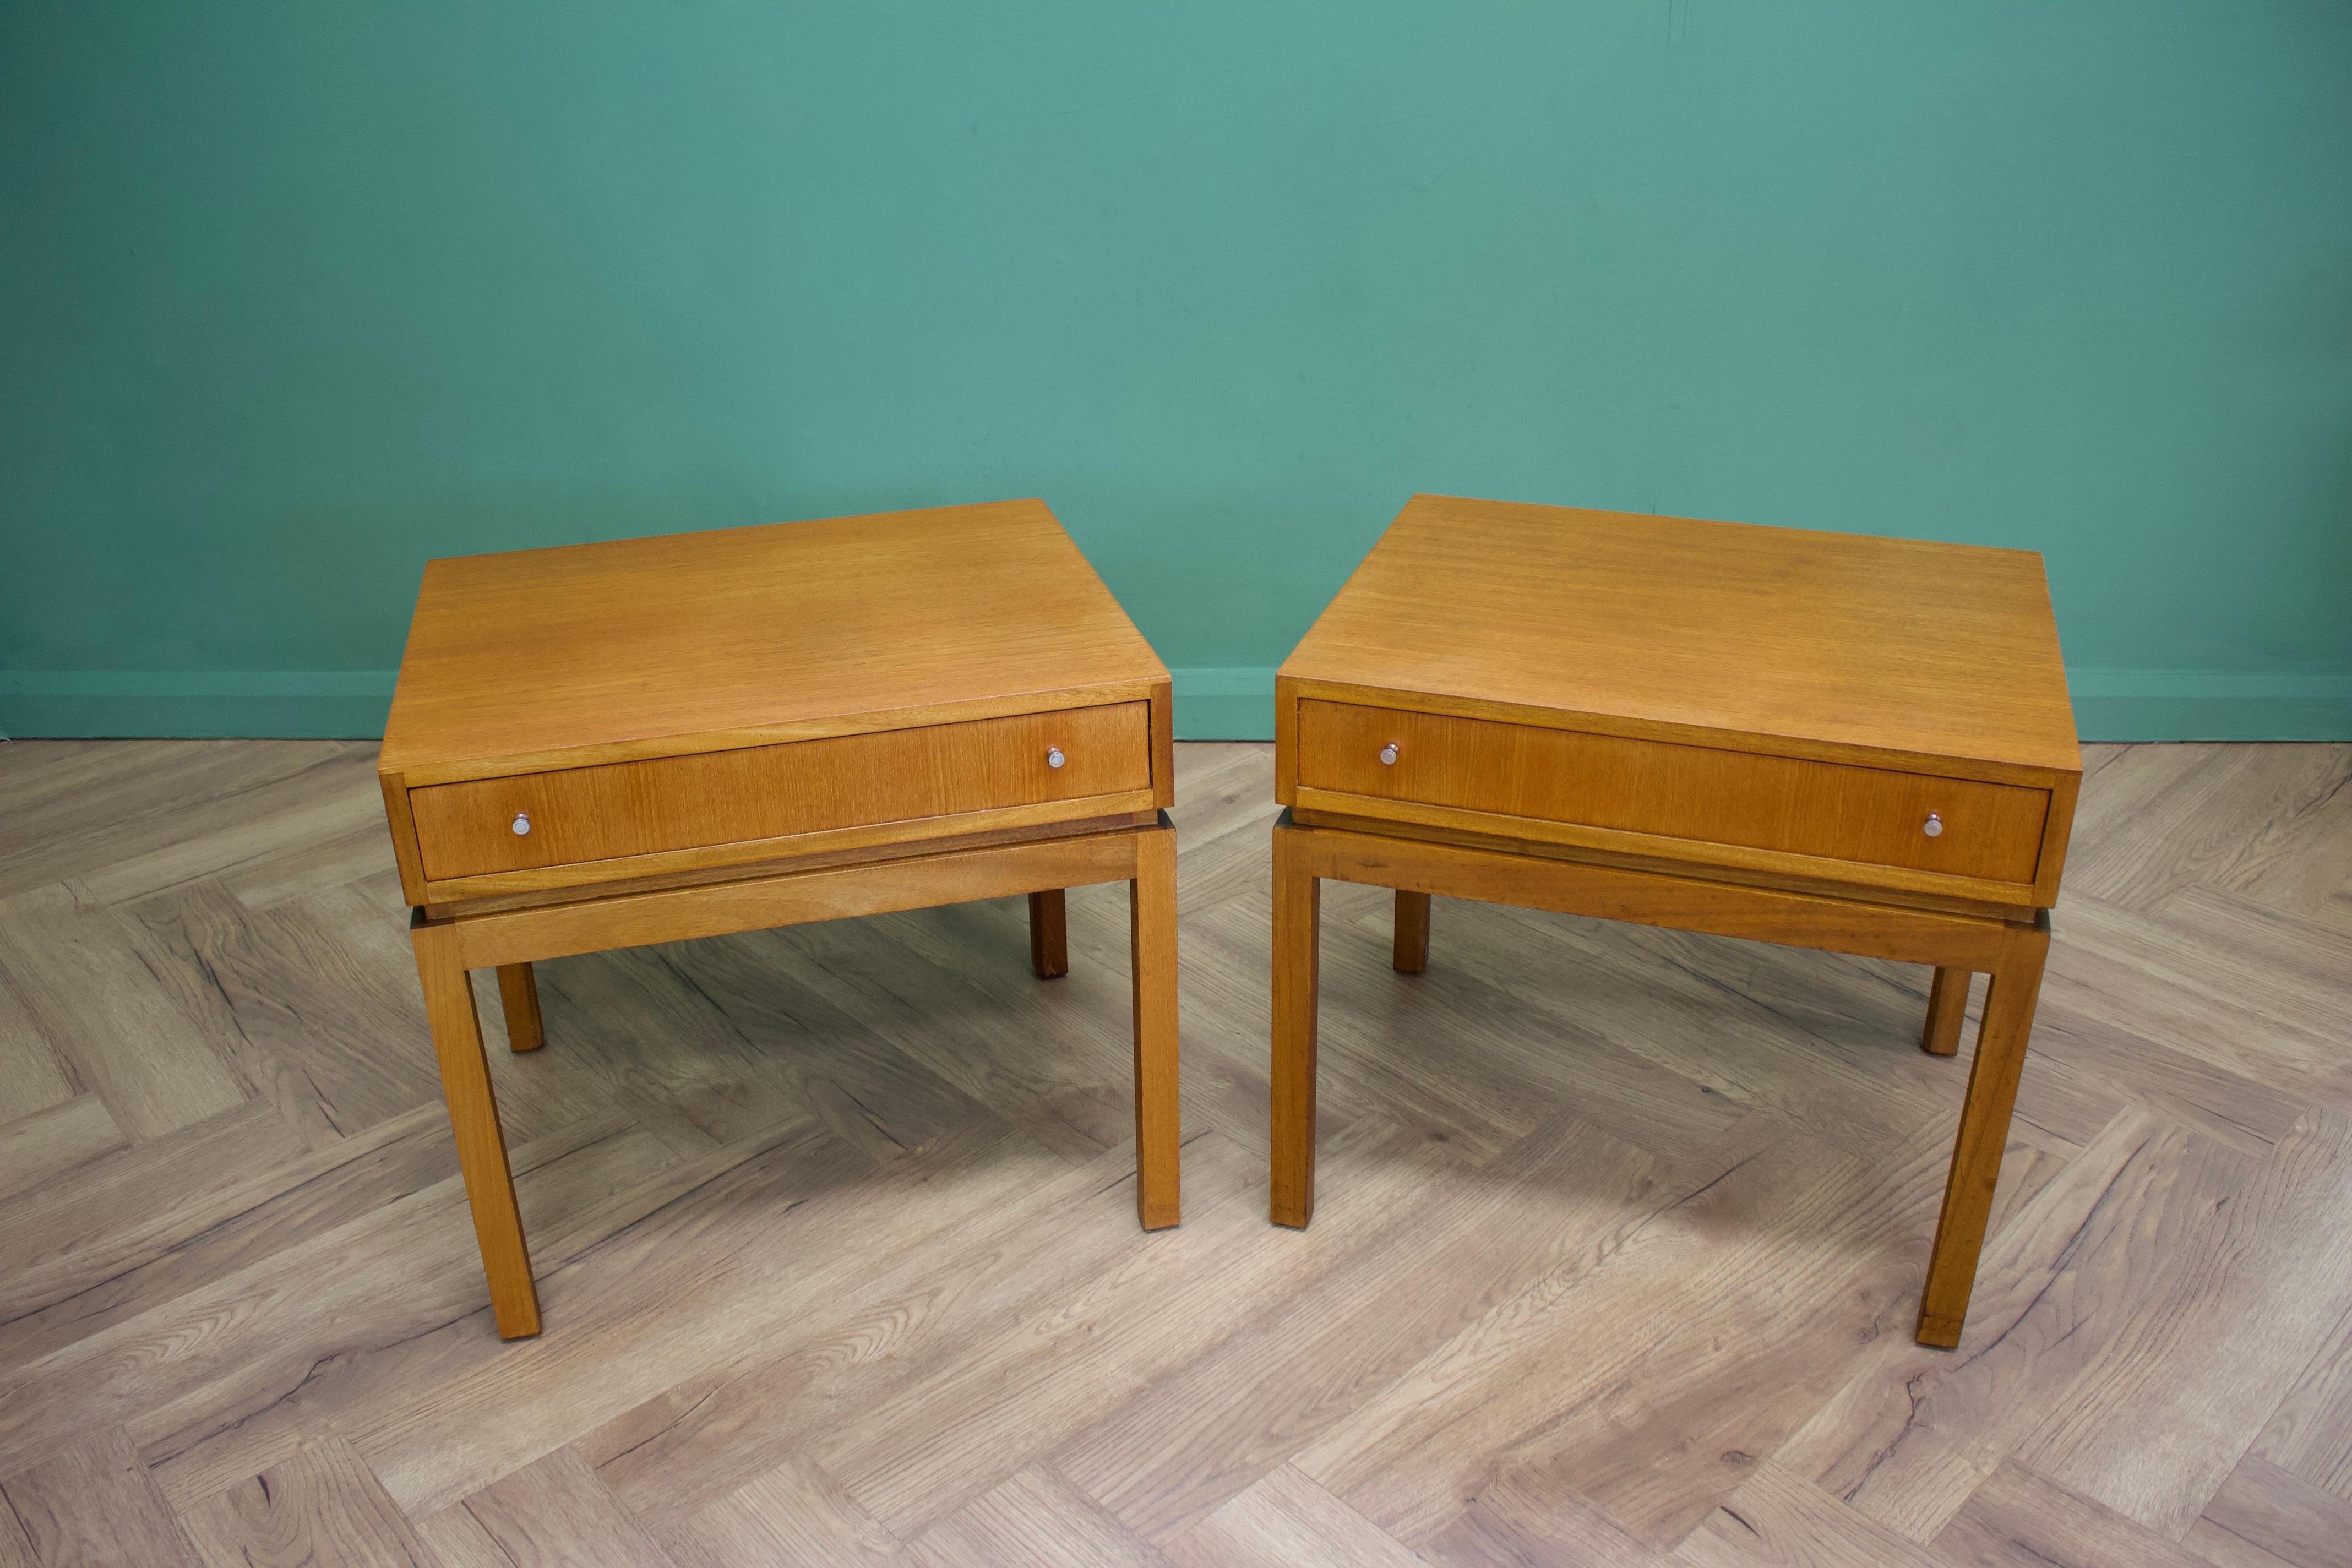 British Midcentury Teak Pair Bedside Tables from Greaves and Thomas, 1950s